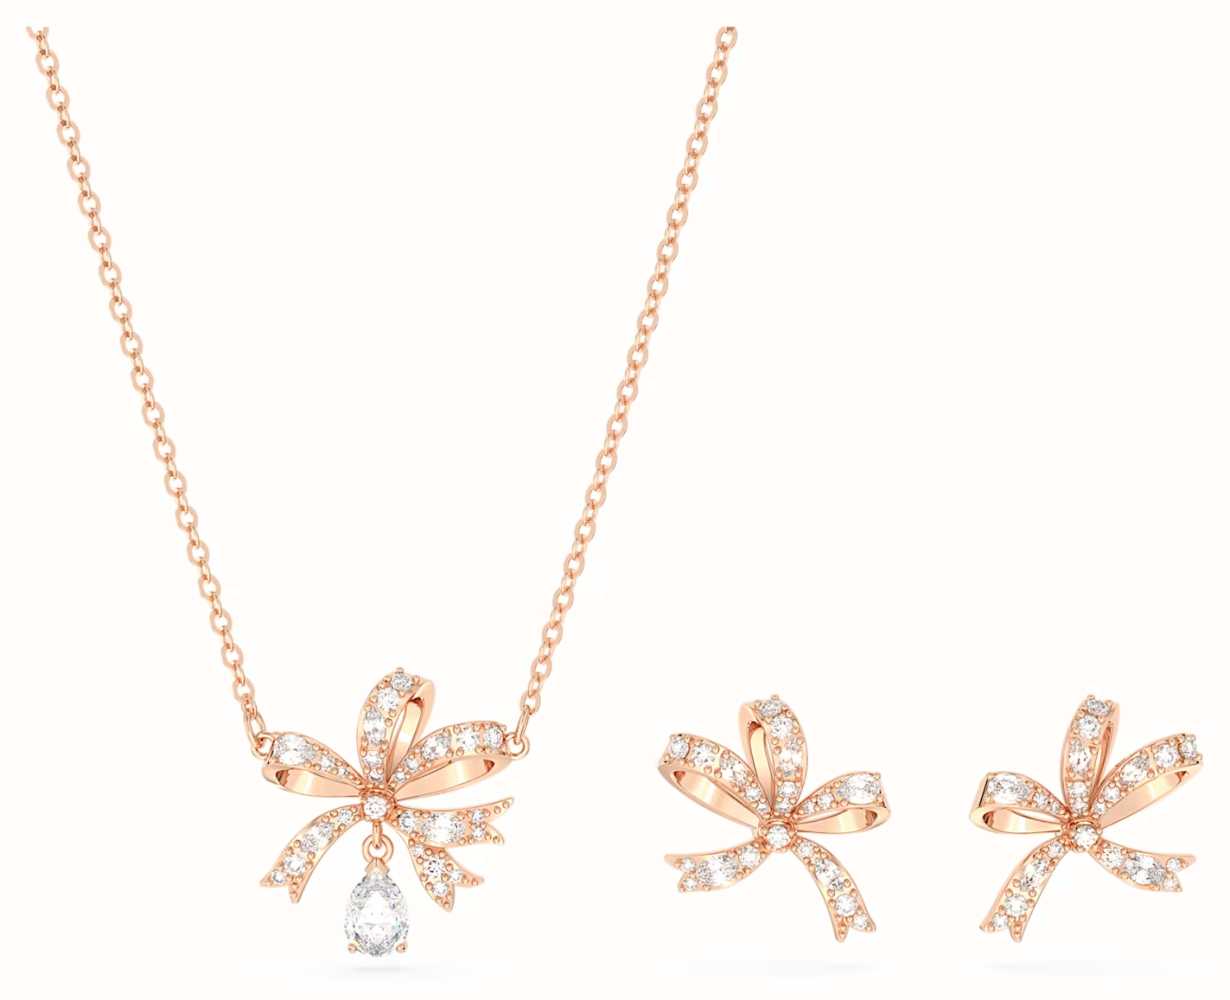 Swarovski Volta Bow Necklace And Earrings Set | Rose Gold-Tone